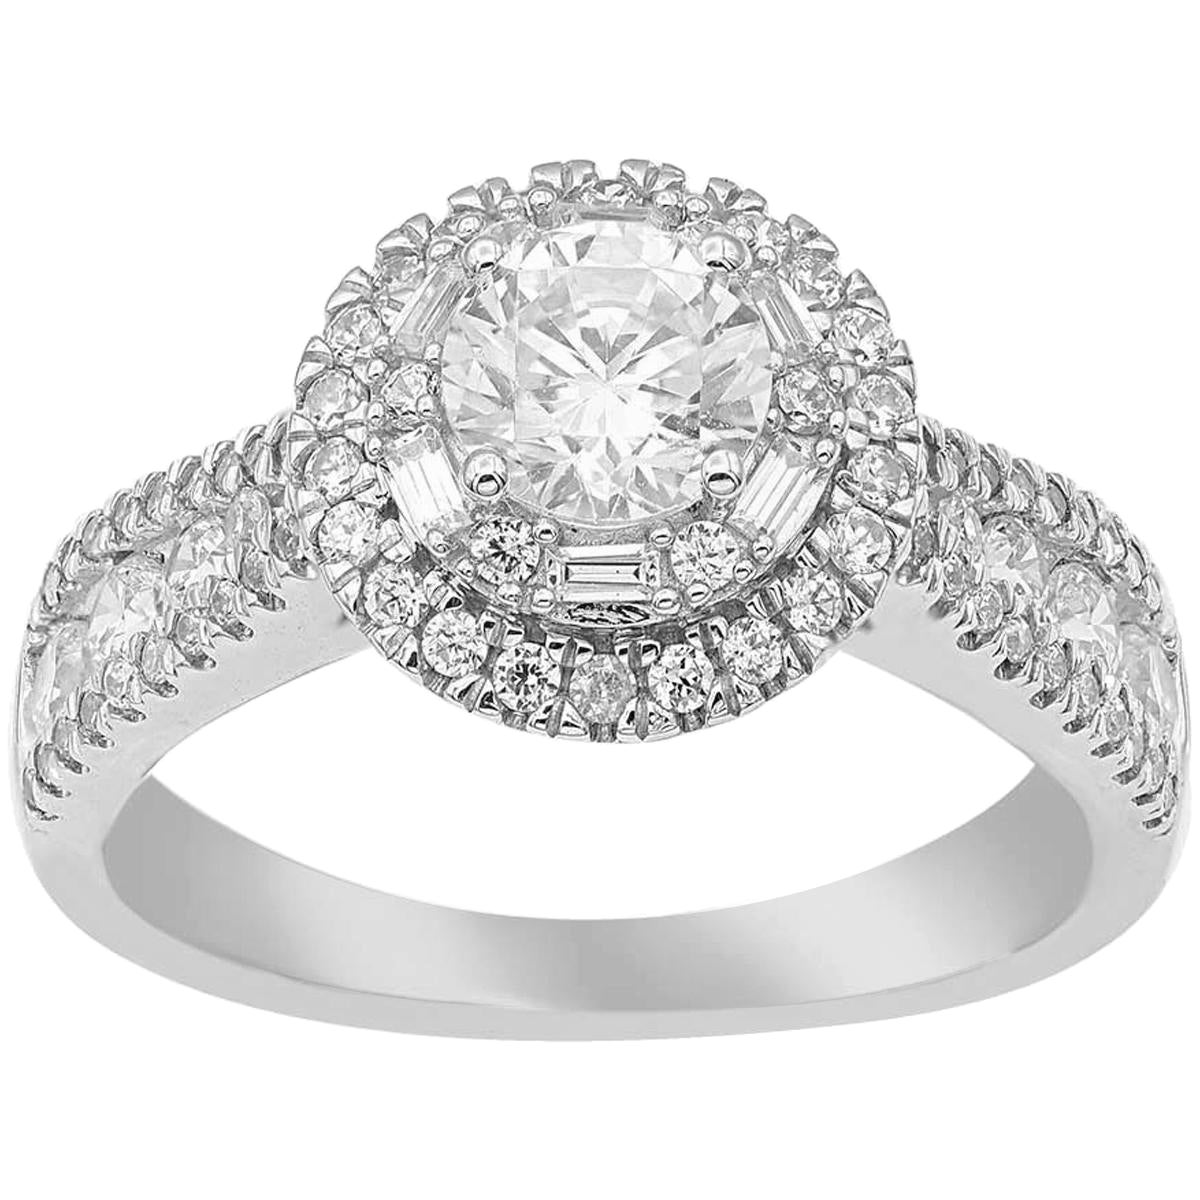 TJD 1.50 Carat Round/Baguette Diamond 18K White Gold Double Halo Engagement Ring